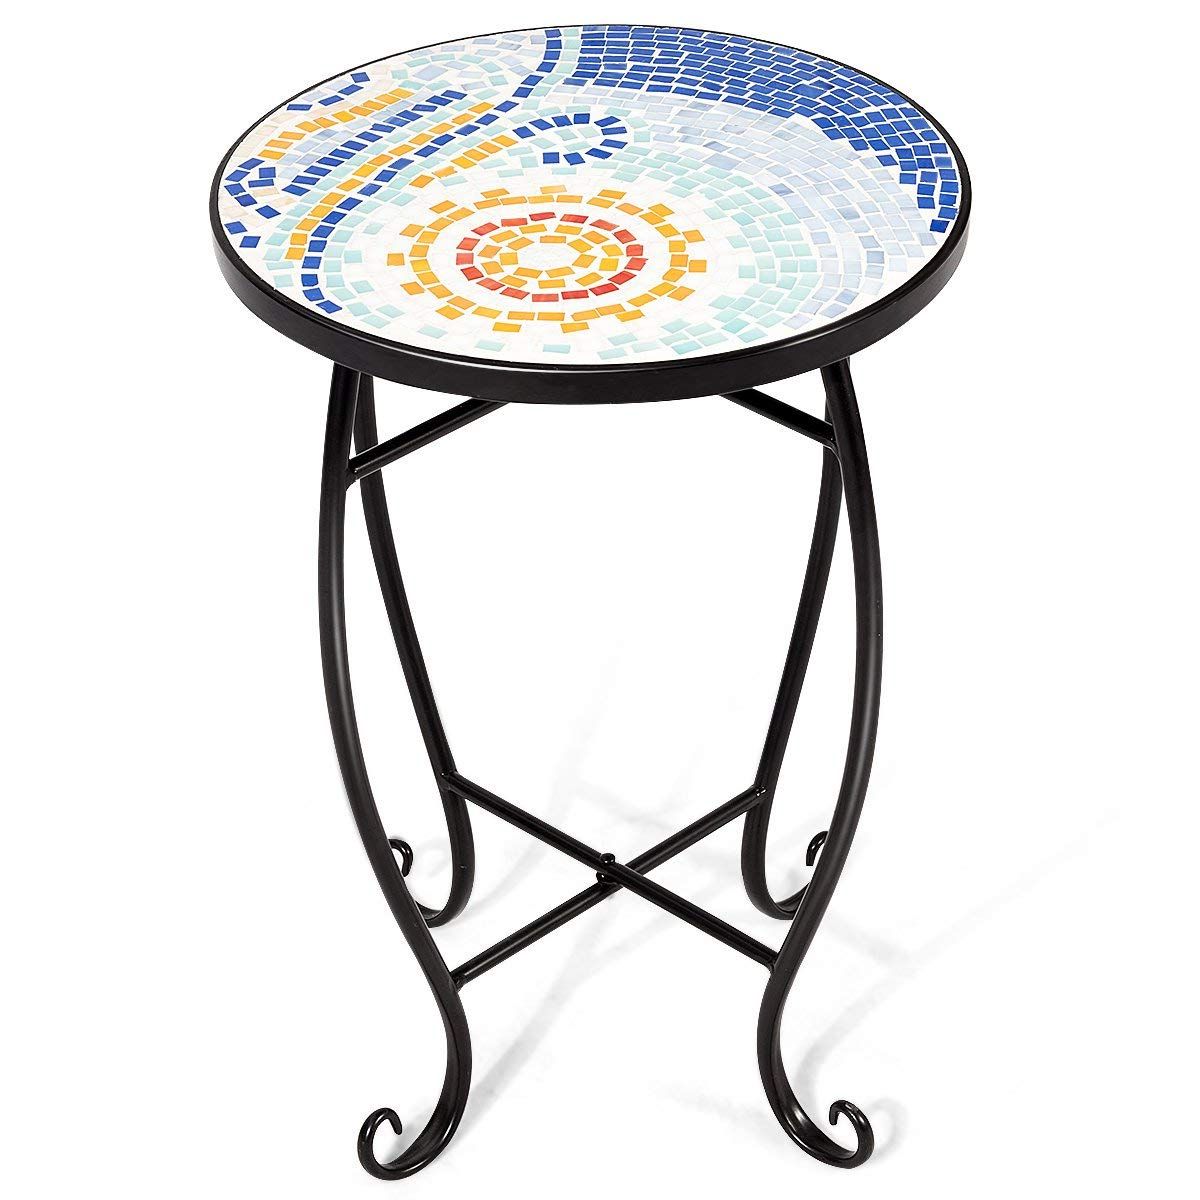 Buy Giantex Mosaic Round Side Accent Table Patio Plant Stand Porch With Regard To Current Ocean Mosaic Outdoor Accent Tables (View 1 of 15)